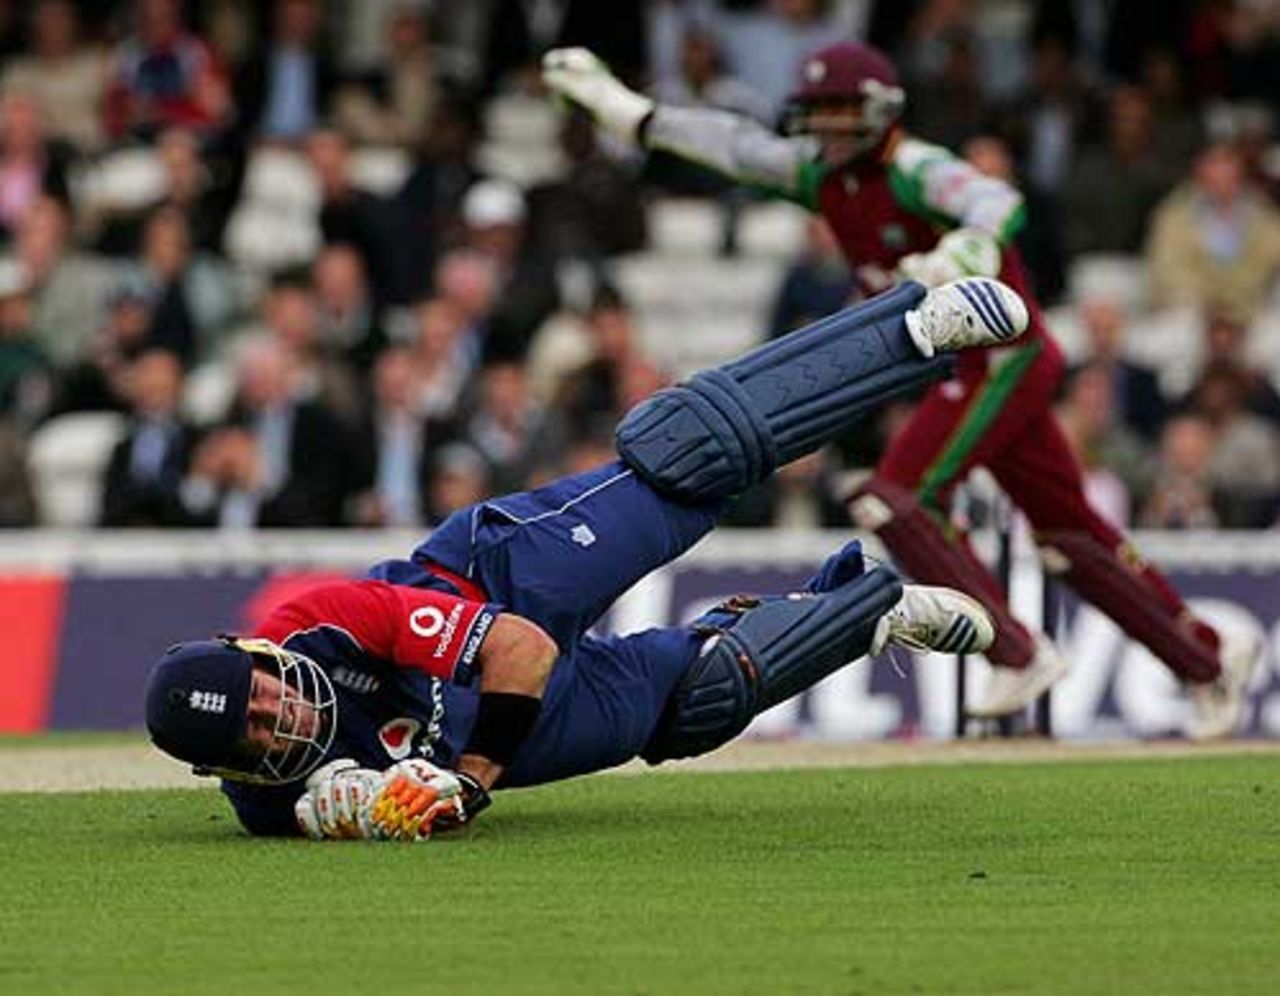 Kevin Pietersen landed heavily and hurt his knee while being run out for 16, England v West Indies, Twenty20, The Oval, June 28, 2007